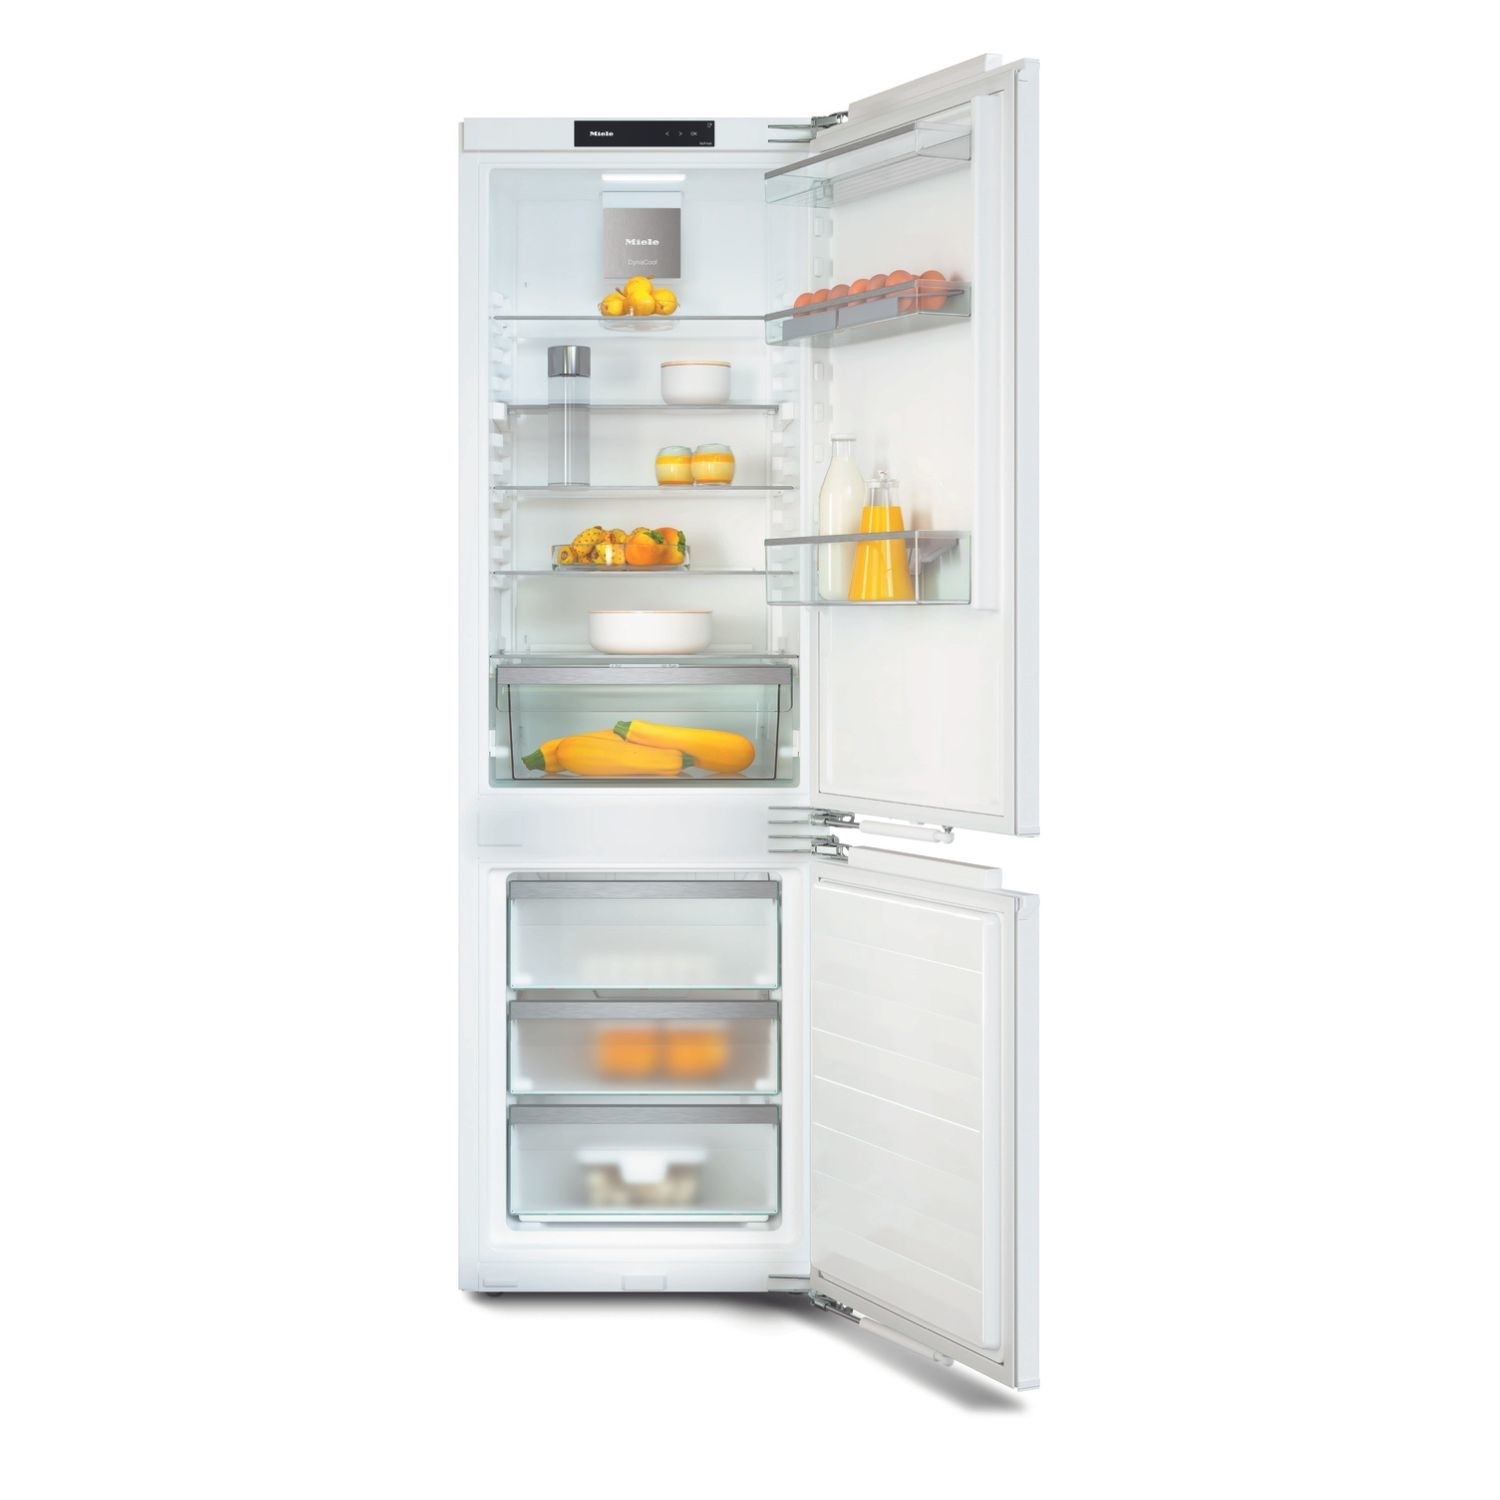 Photos - Other for Computer Miele 253 Litre 60/40 Integrated Fridge Freezer KFN7734C 